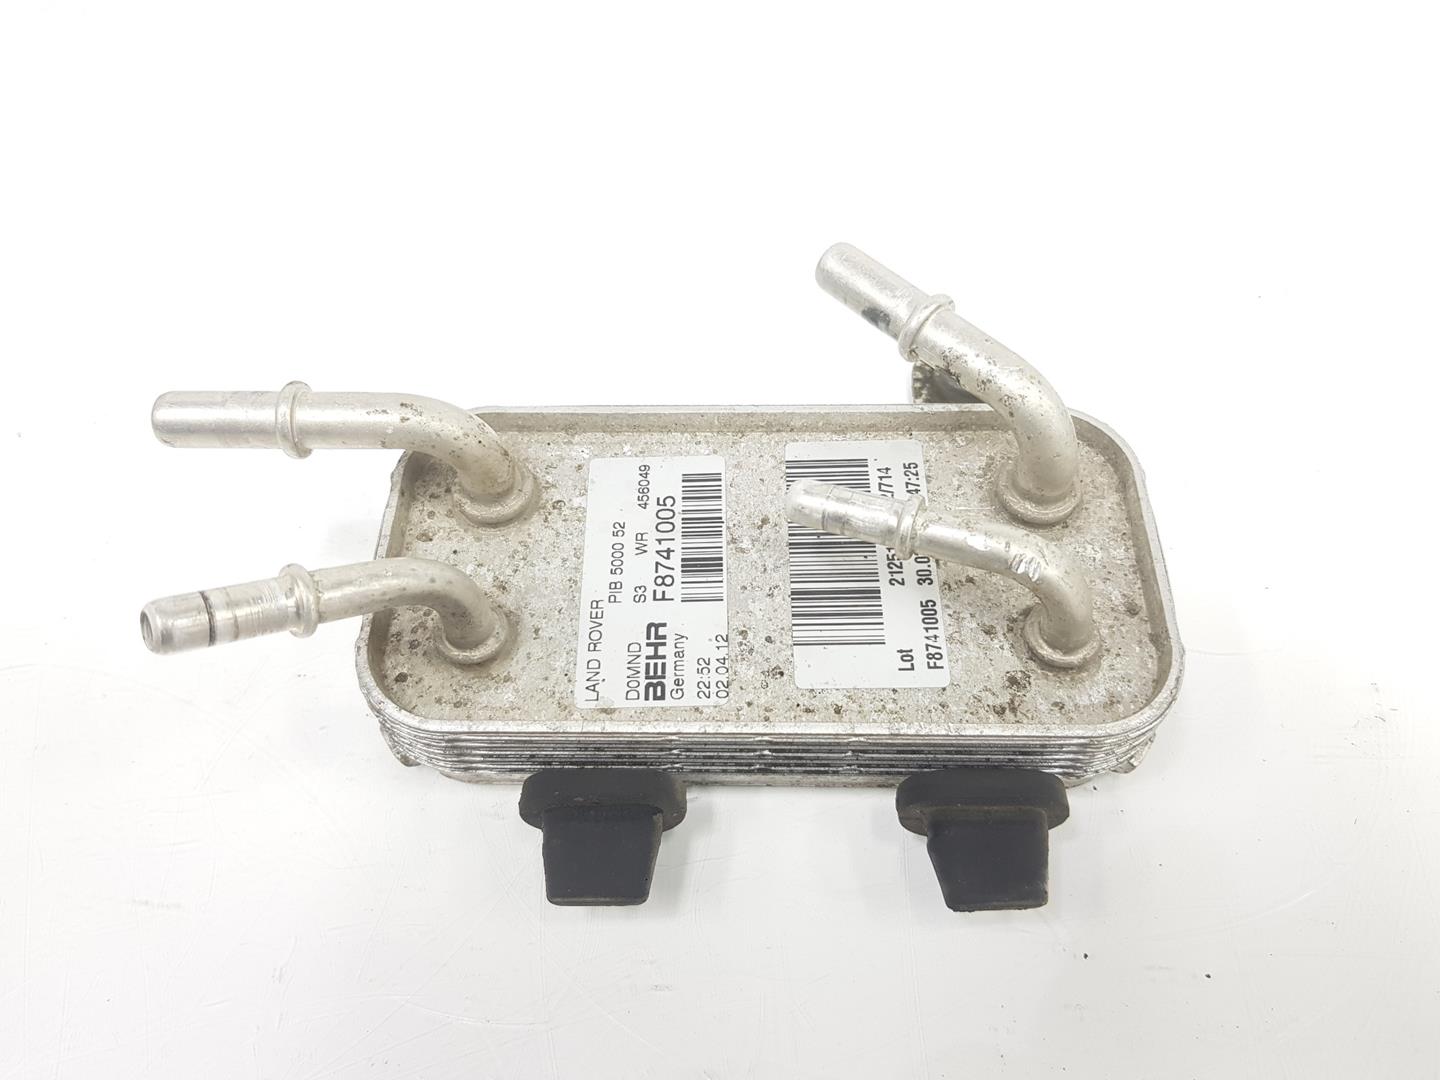 LAND ROVER Discovery 4 generation (2009-2016) Other Engine Compartment Parts LR031827, 5H229N103BB 24131603